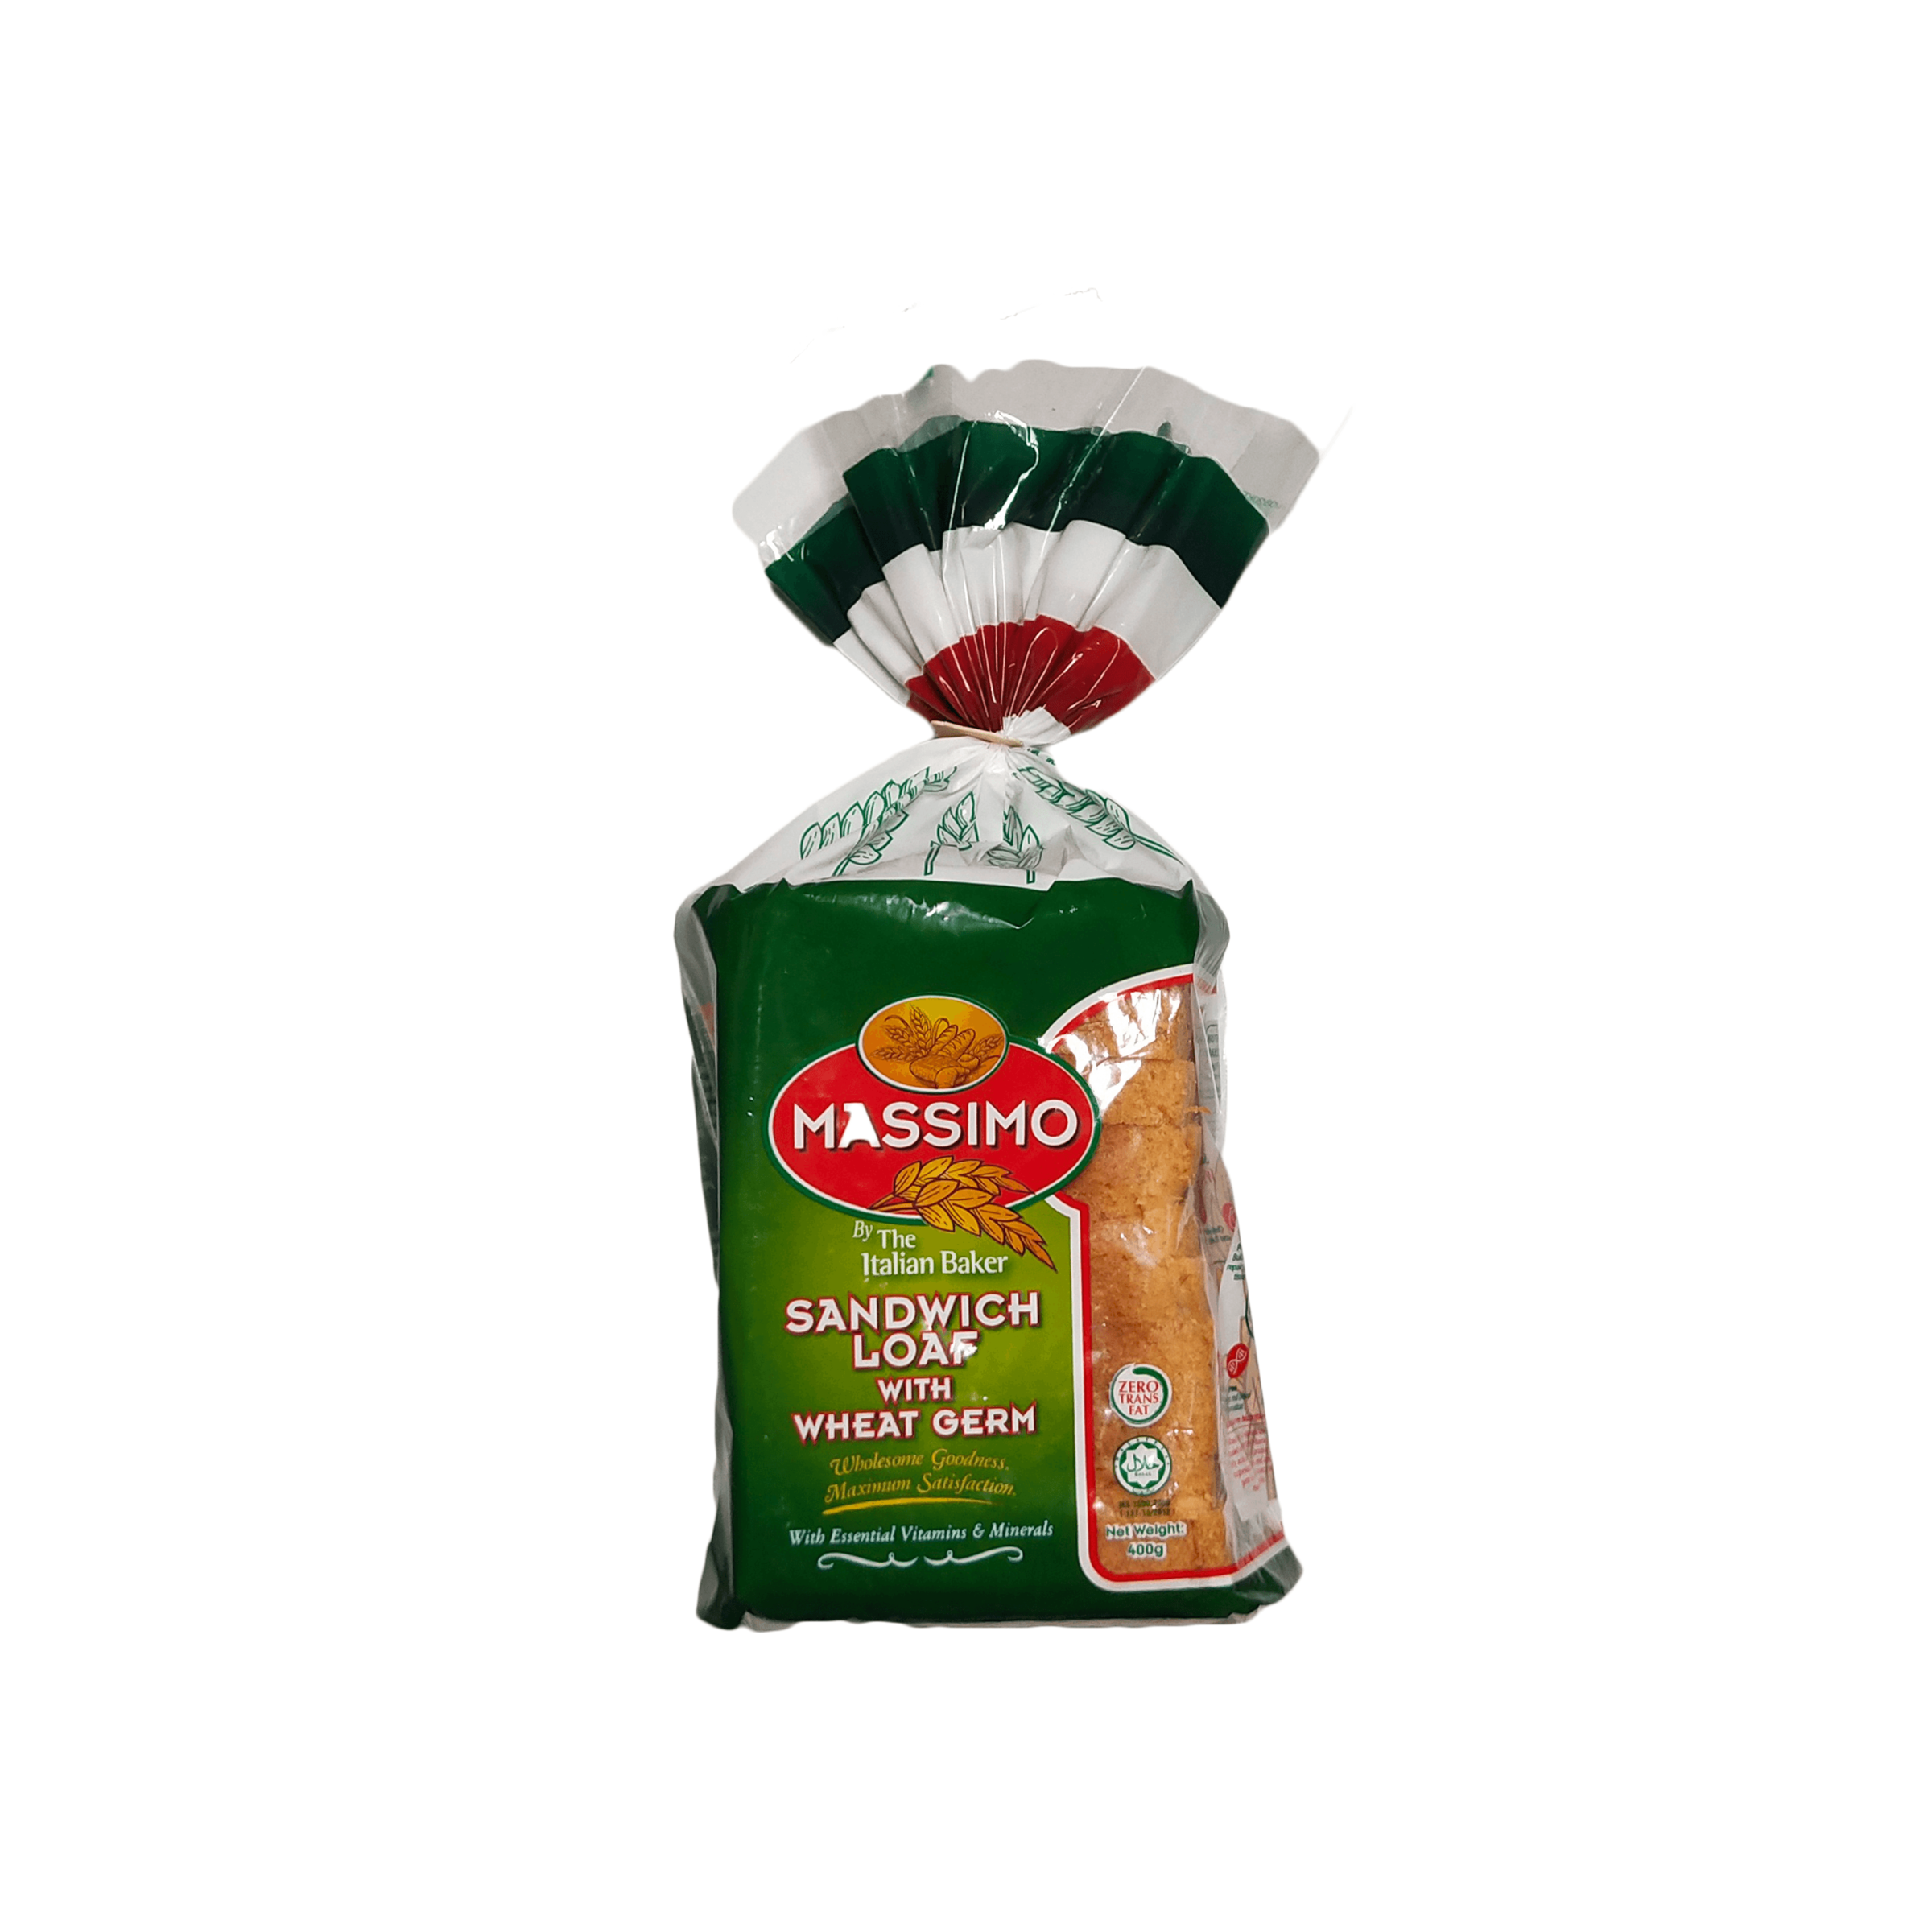 Massimo Sandwich Loaf with Wheat Germ 400g (1).png